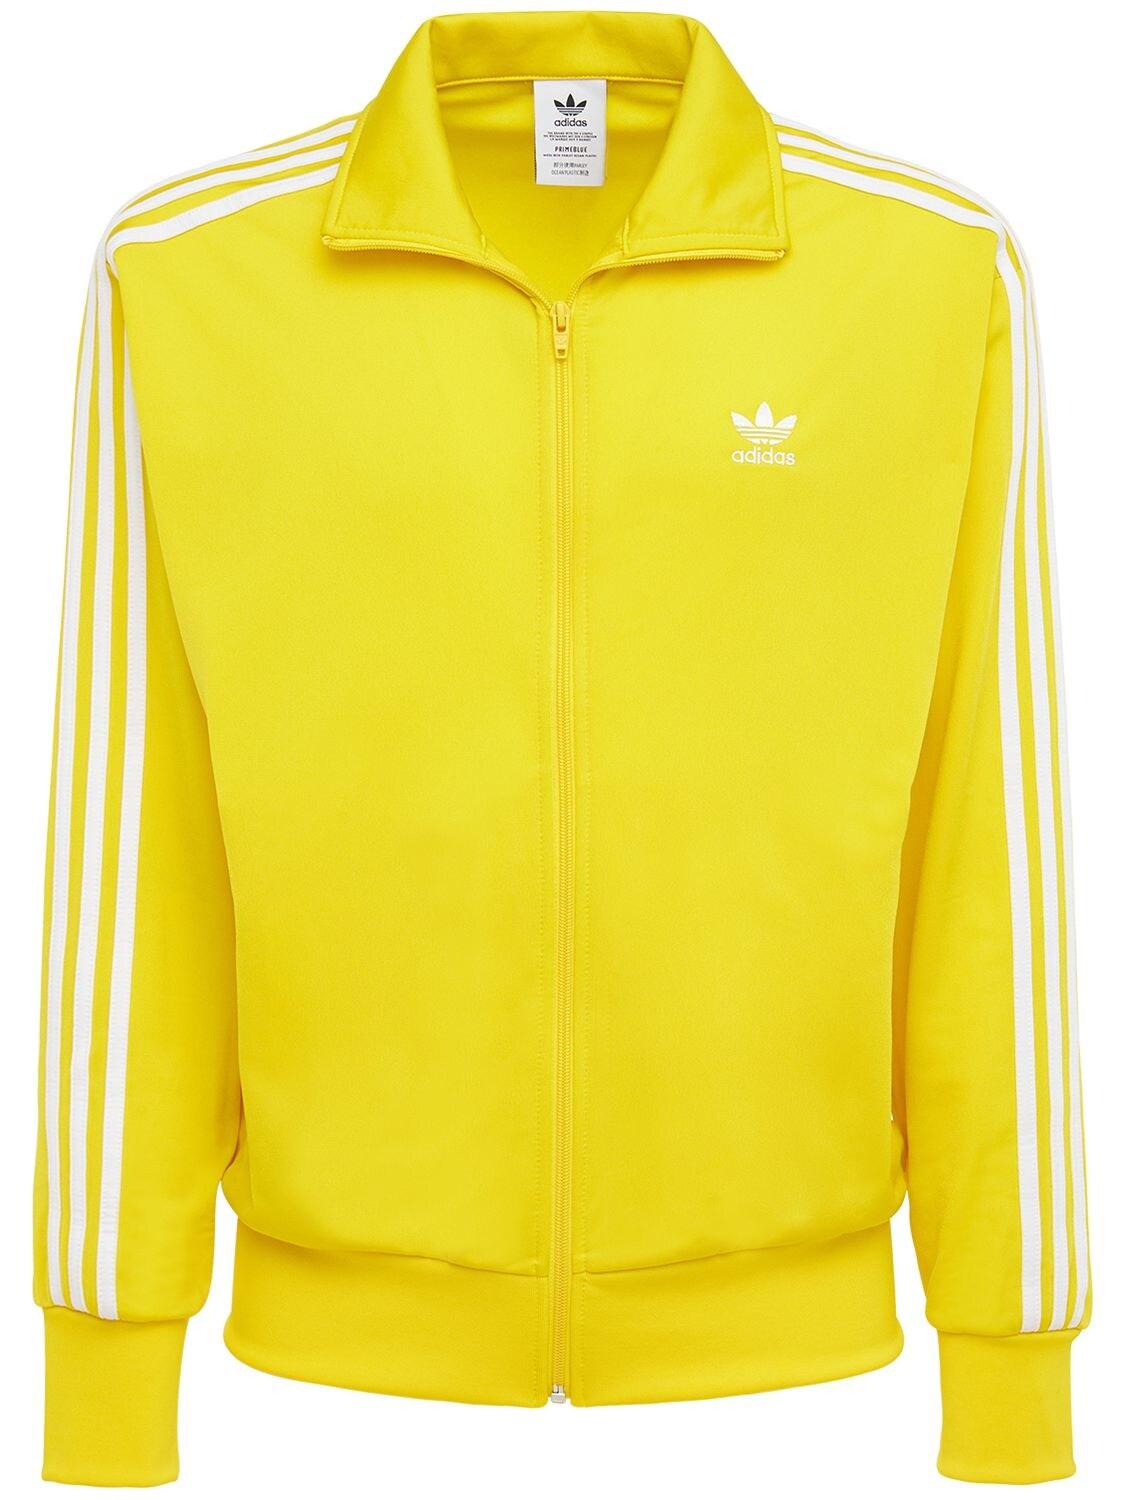 adidas Originals Firebird Track Top in Yellow/White (Yellow) for 